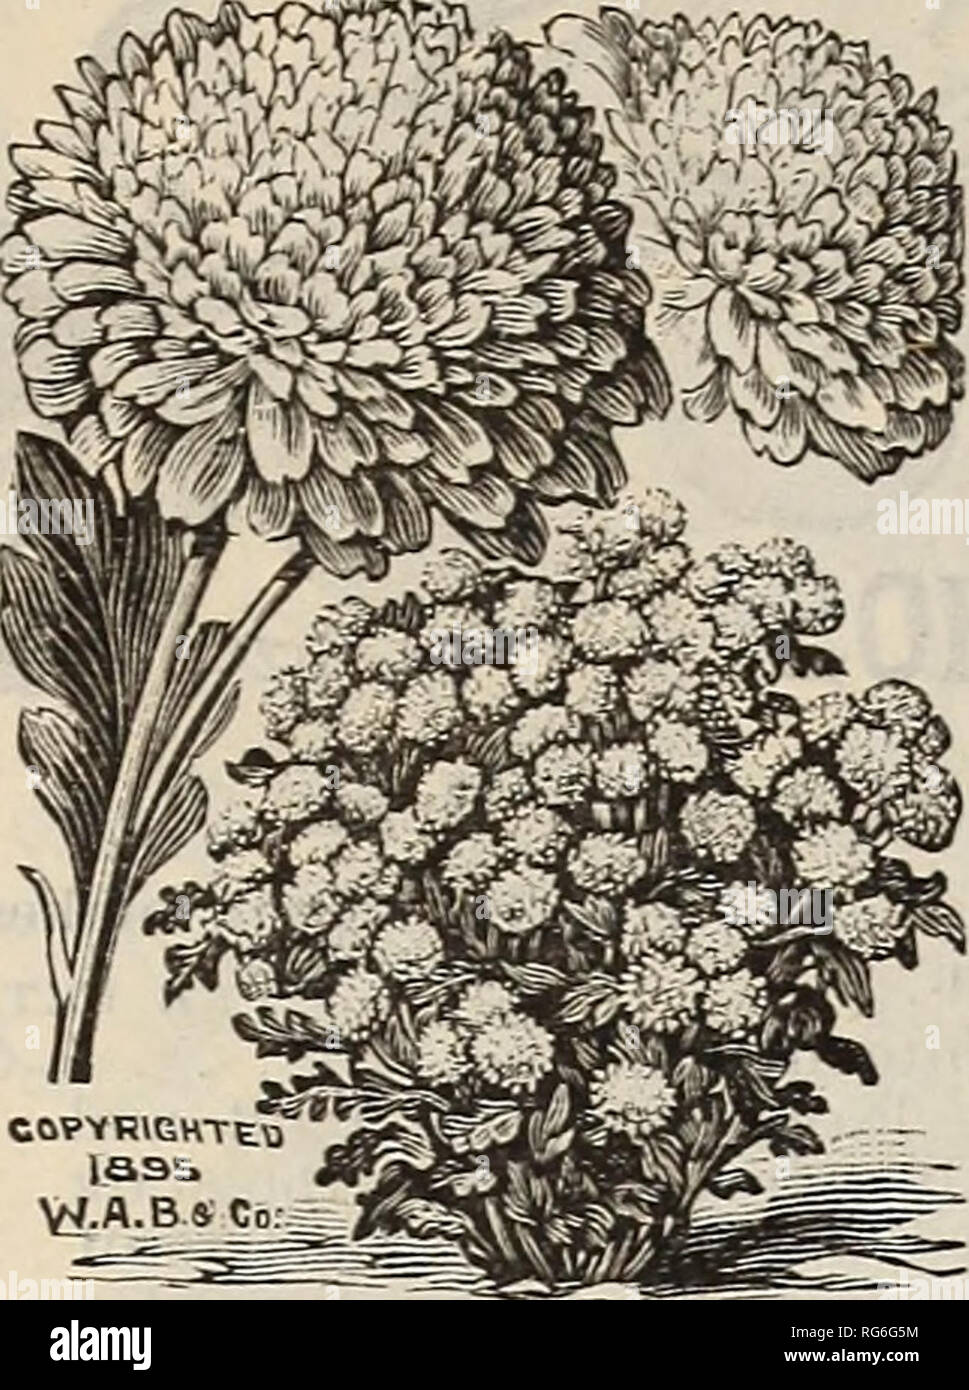 . Burpee's farm annual. Nursery stock Pennsylvania Philadelphia Catalogs; Flowers Catalogs; Vegetables Catalogs; Seeds Catalogs; W. Atlee Burpee Company; Nursery stock; Flowers; Vegetables; Seeds. 152 W. ATLEE BURPEE &amp; CO., PHILADELPHIA. FEVERFEW. Matricaria eximia, fl. pi.. The highly esteemed Bachelor' s-Buttons of the old-time garden. Plants are pyramidal in growth, eight inches high, with dark-green leaves, which are laci- niated like a finely cut fern. The plant is sur- mounted by numerous tall, freely branching flower-stems, which at- tain a height of eighteen inches, and are literal Stock Photo